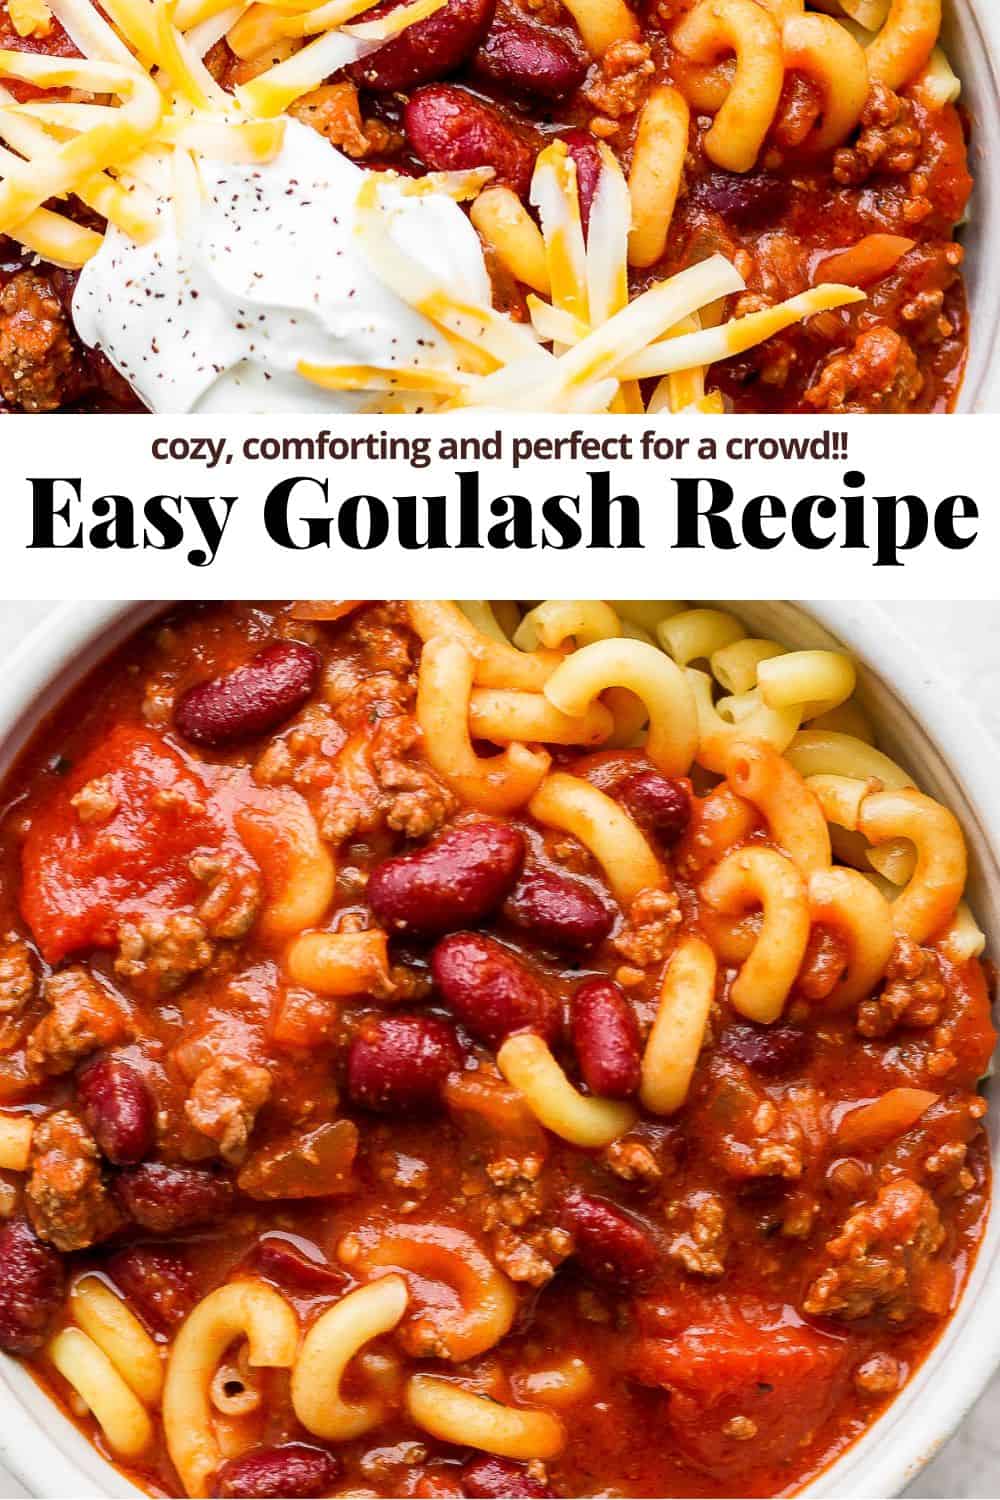 Pinterest image, sour cream and cheese on a bowl of goulash, the recipe title, and a bowl of plain goulash in a bowl.